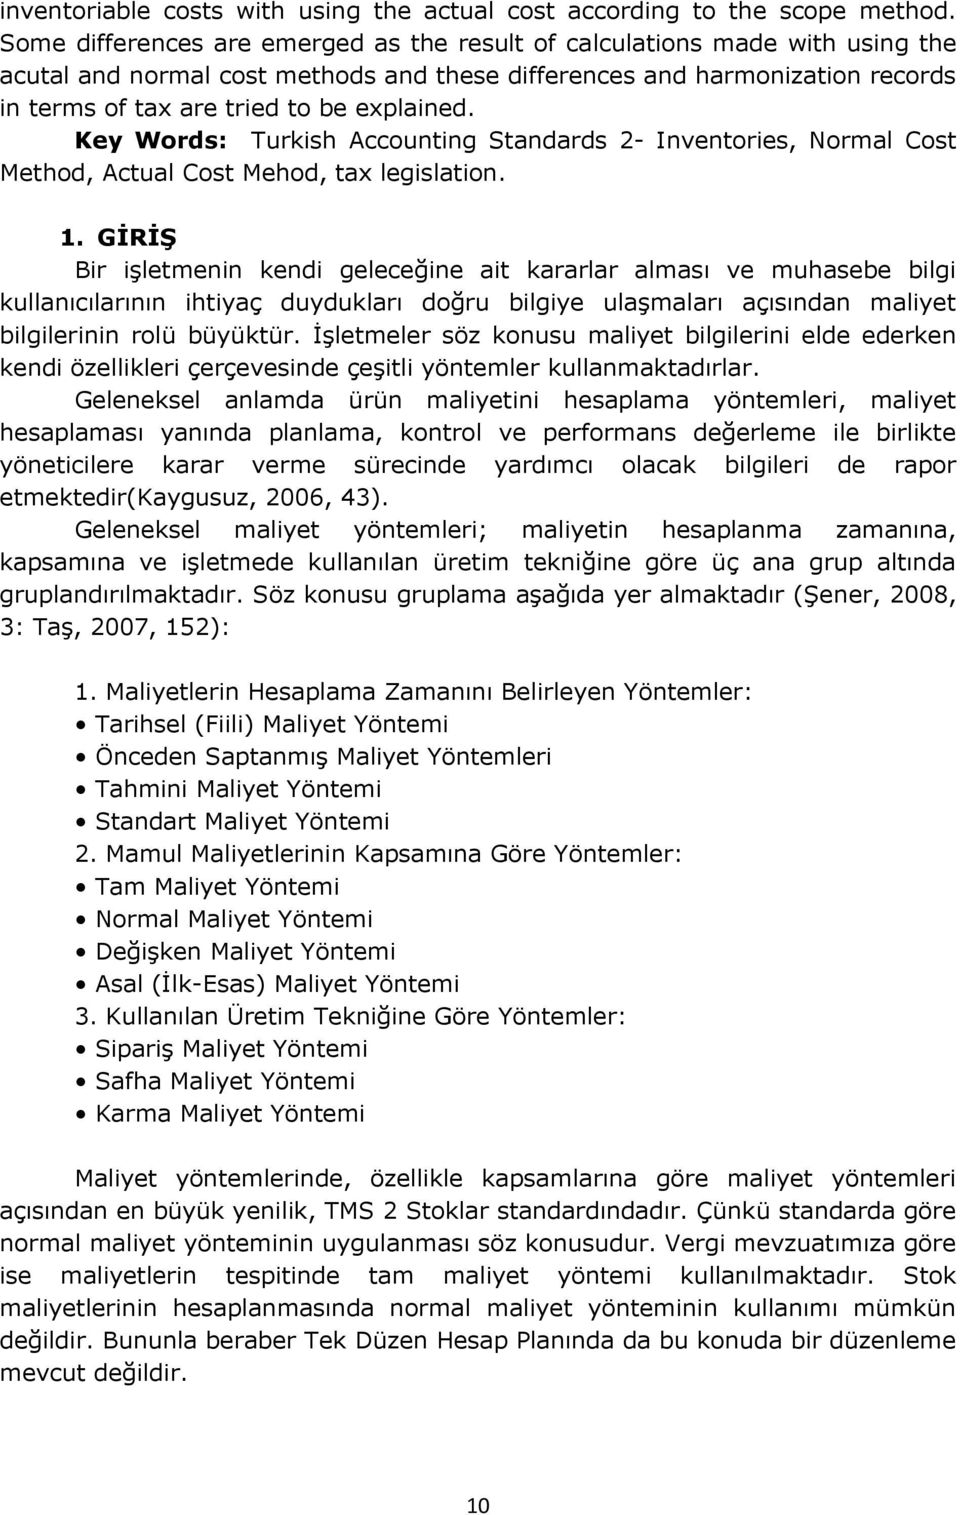 Key Words: Turkish Accounting Standards 2- Inventories, Normal Cost Method, Actual Cost Mehod, tax legislation. 1.